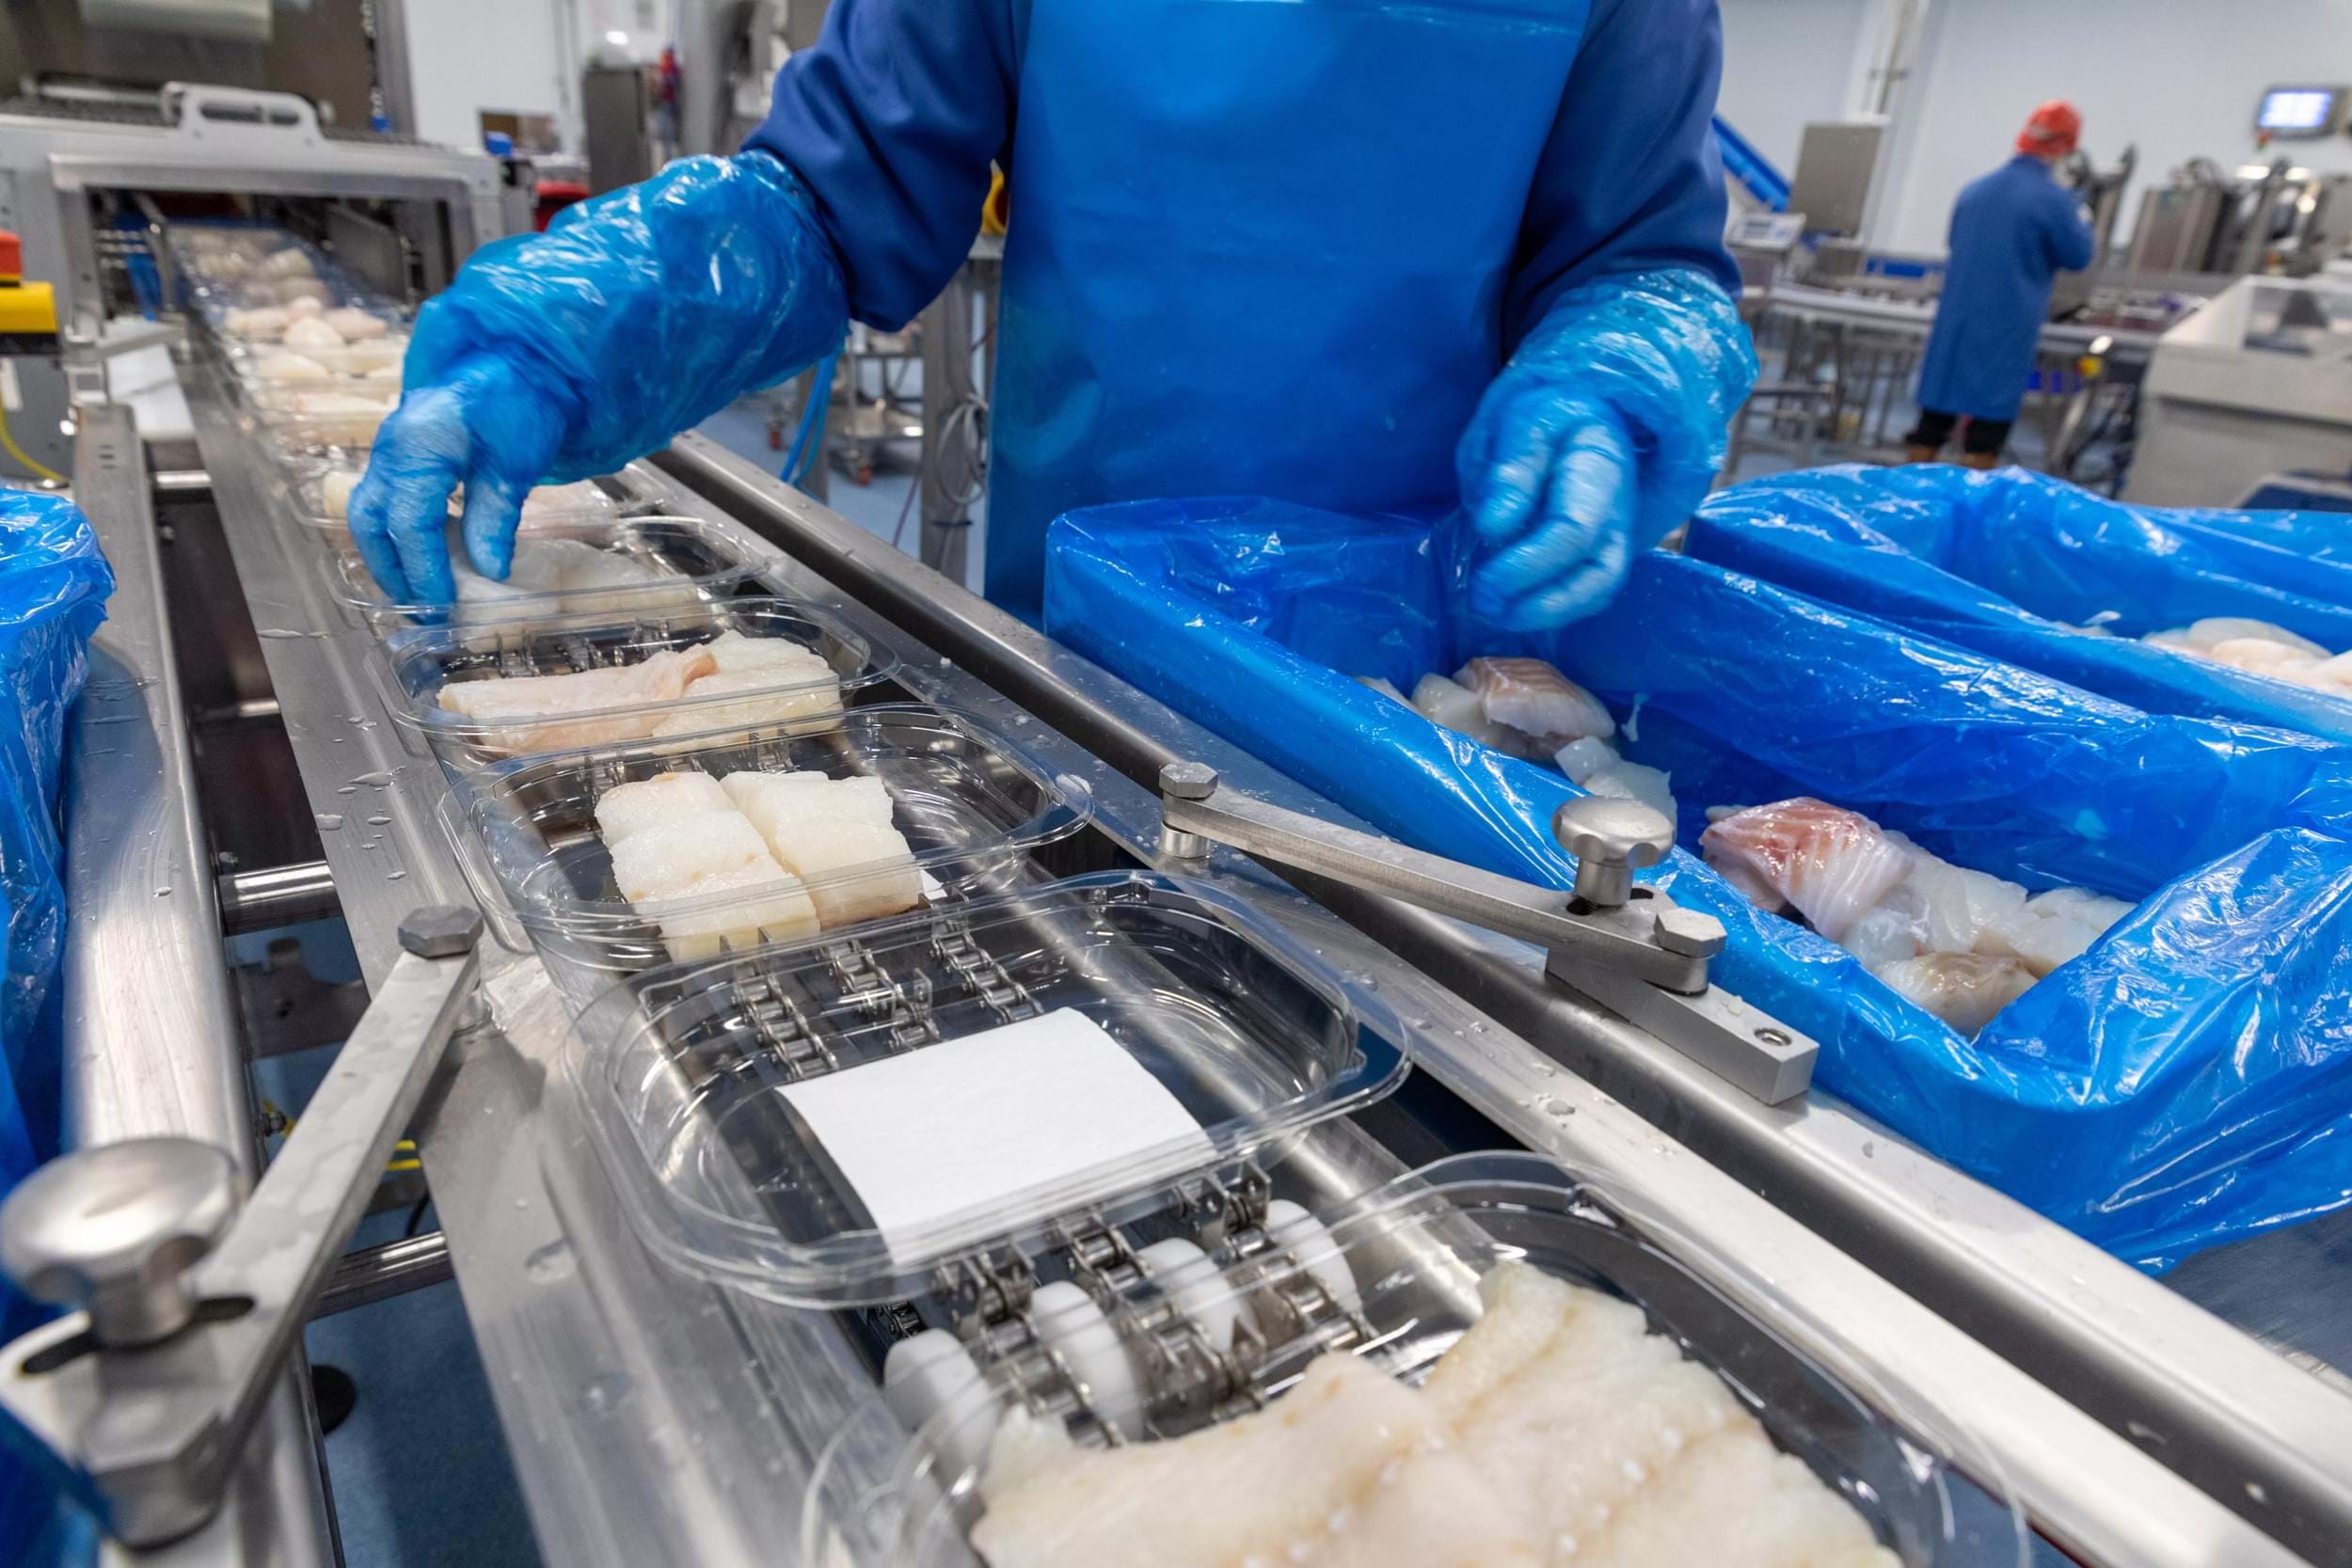 A fish processing worket places fish fillets into plastic containers on a production line.